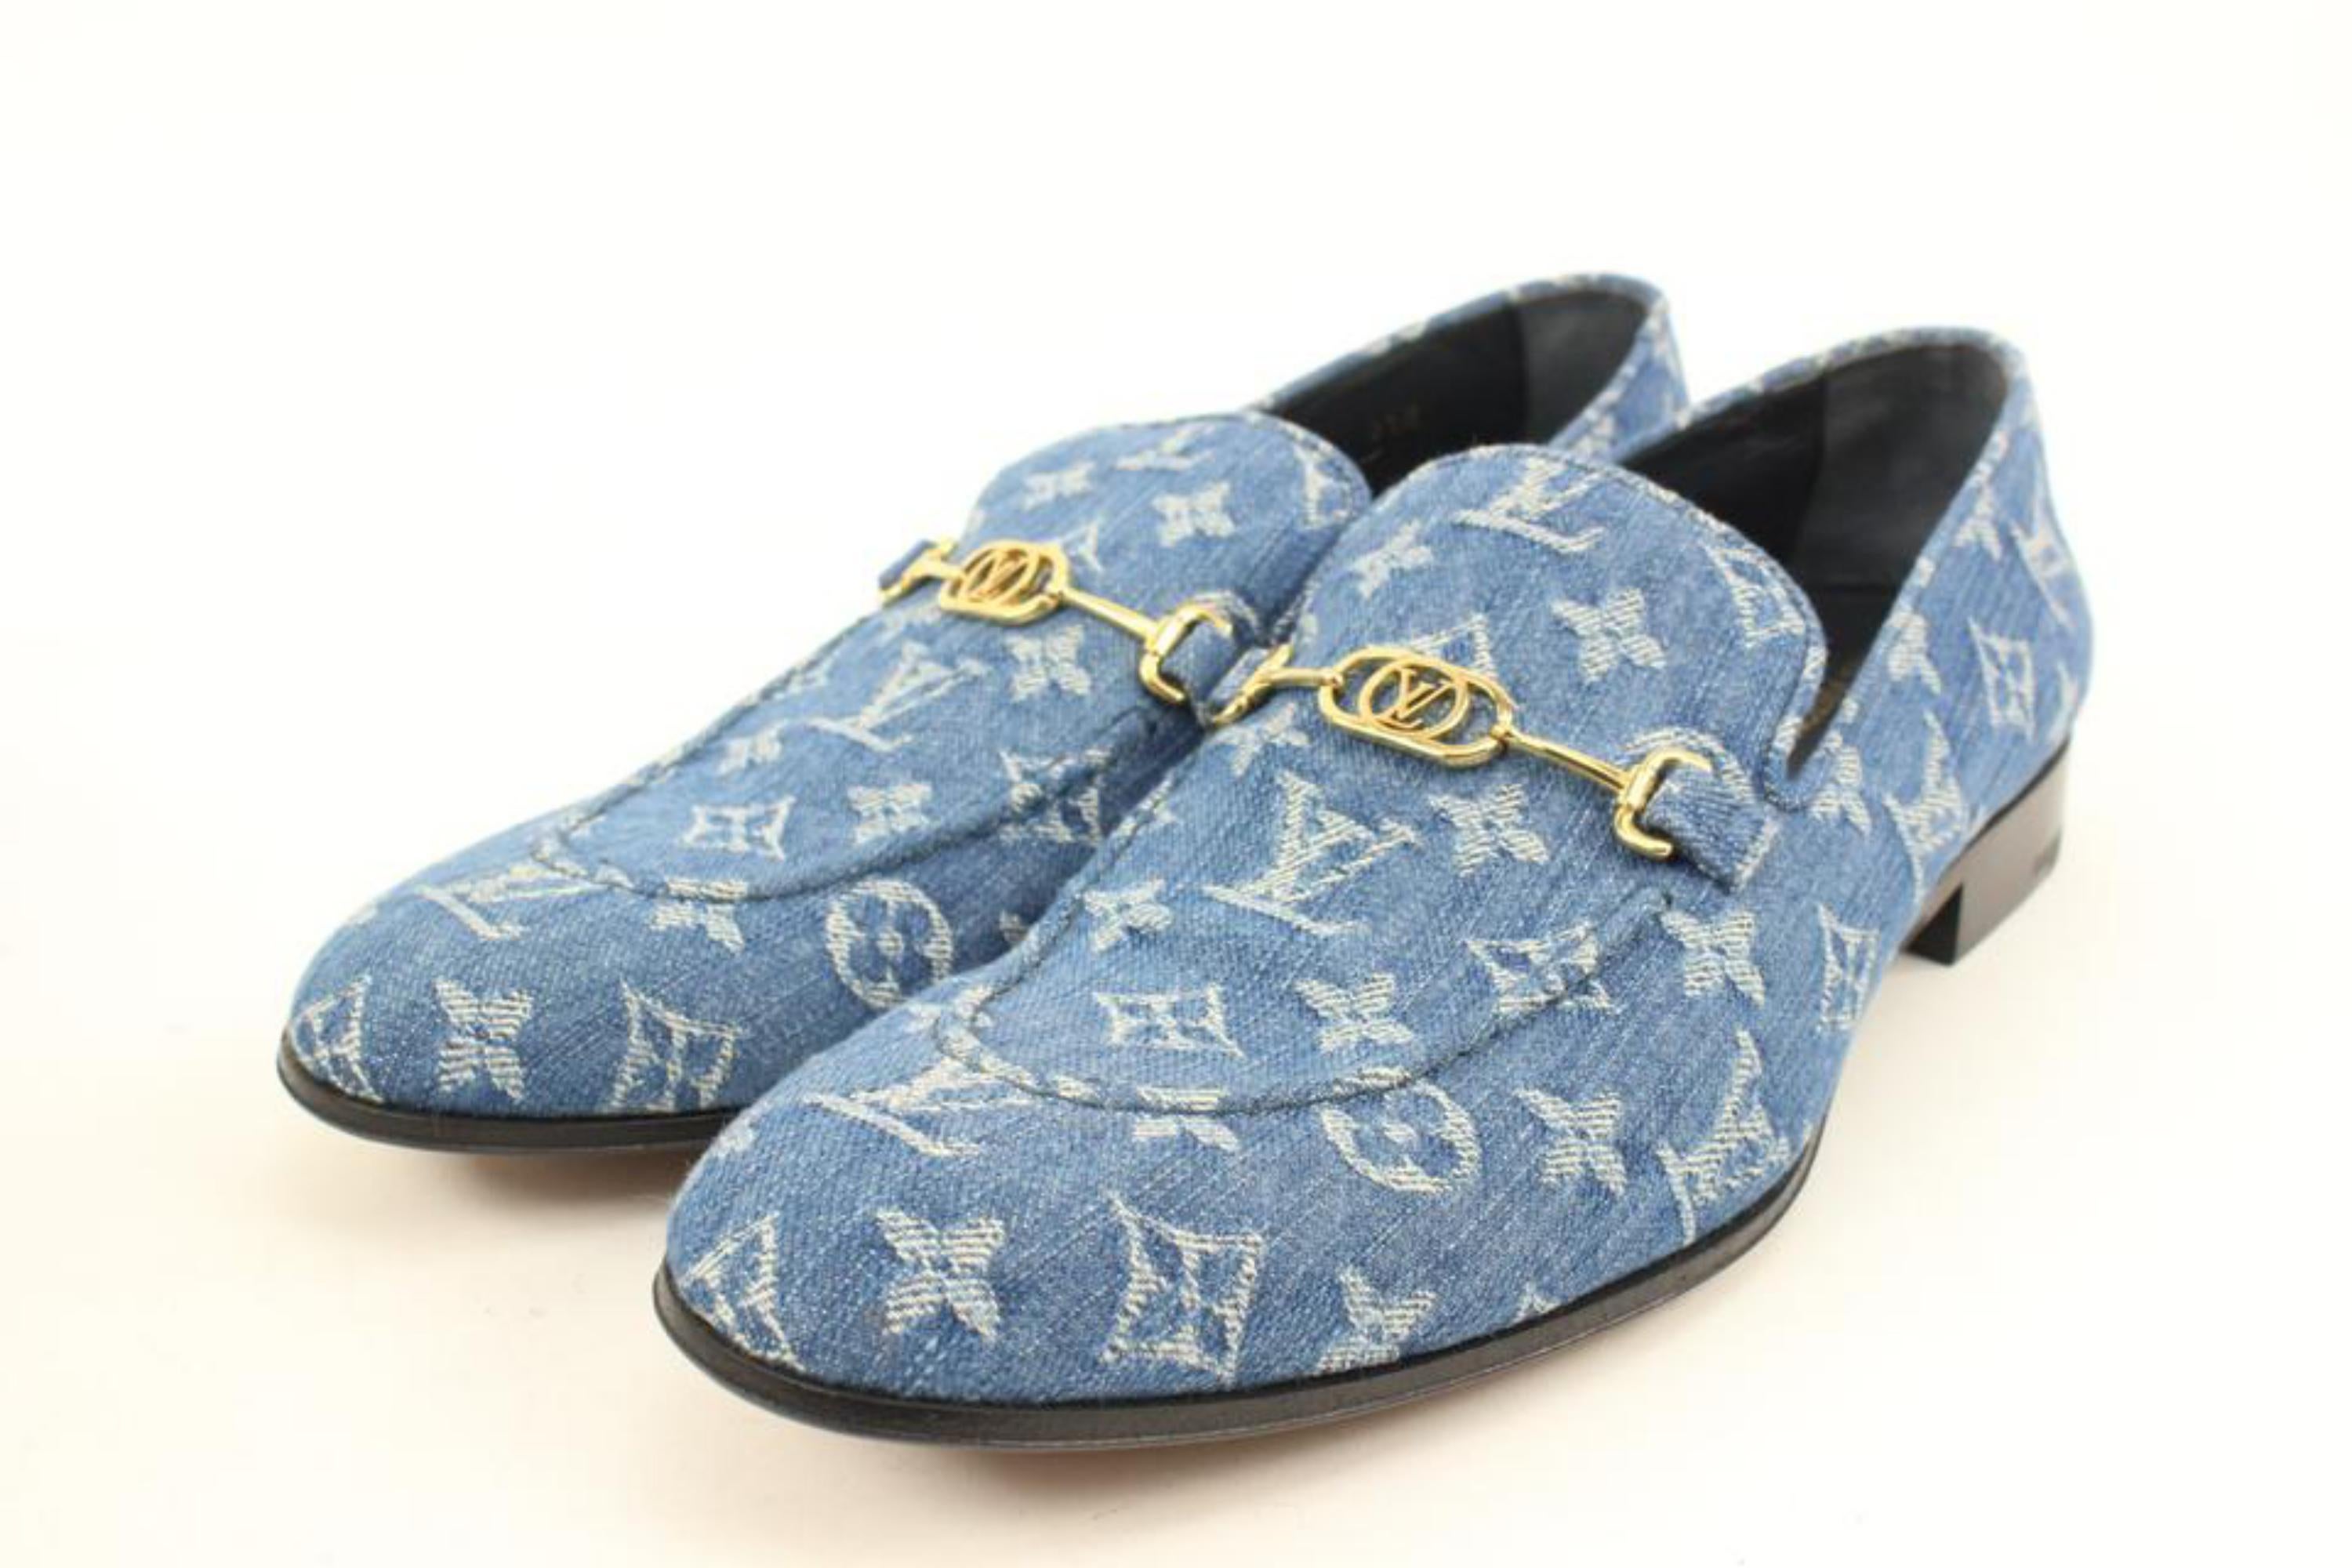 Louis Vuitton Mens 9.5 Limited Monogram Denim Souliers Club Oxford Loafer 01L37V
Date Code/Serial Number: DI 0138
Made In: Italy
Measurements: Length:  12